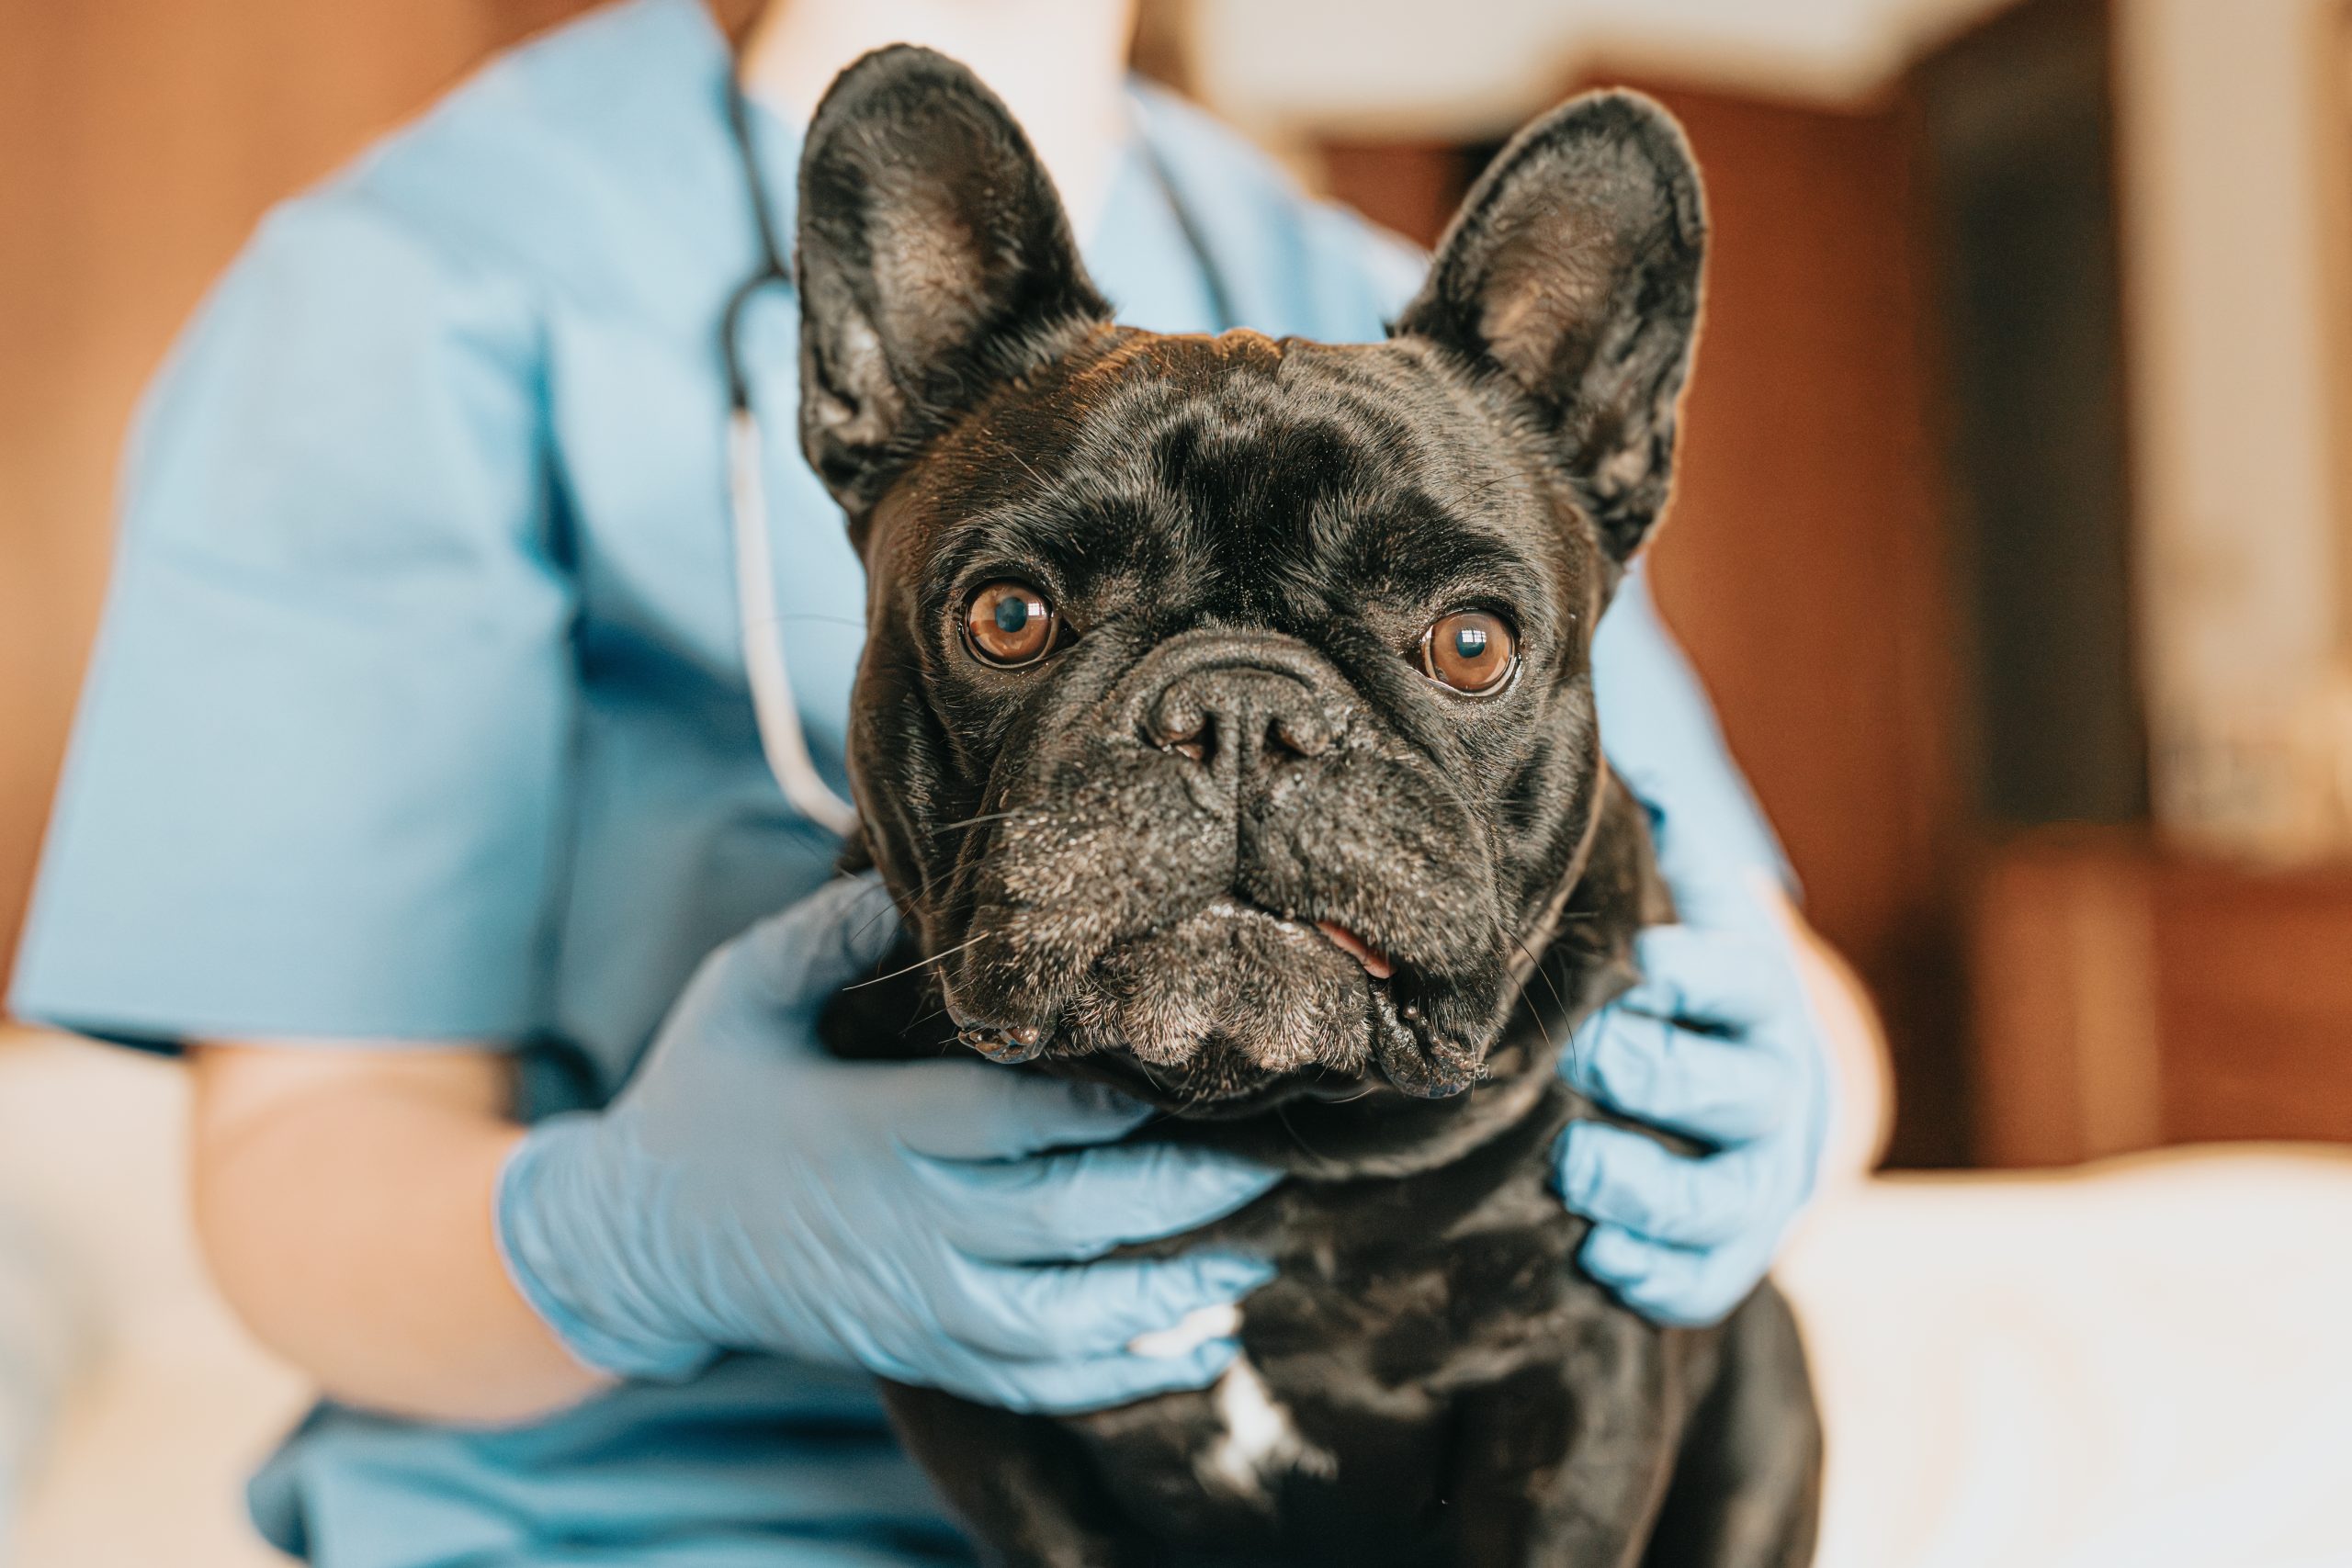 Vets welcome sharp decline in demand for flat-faced dogs